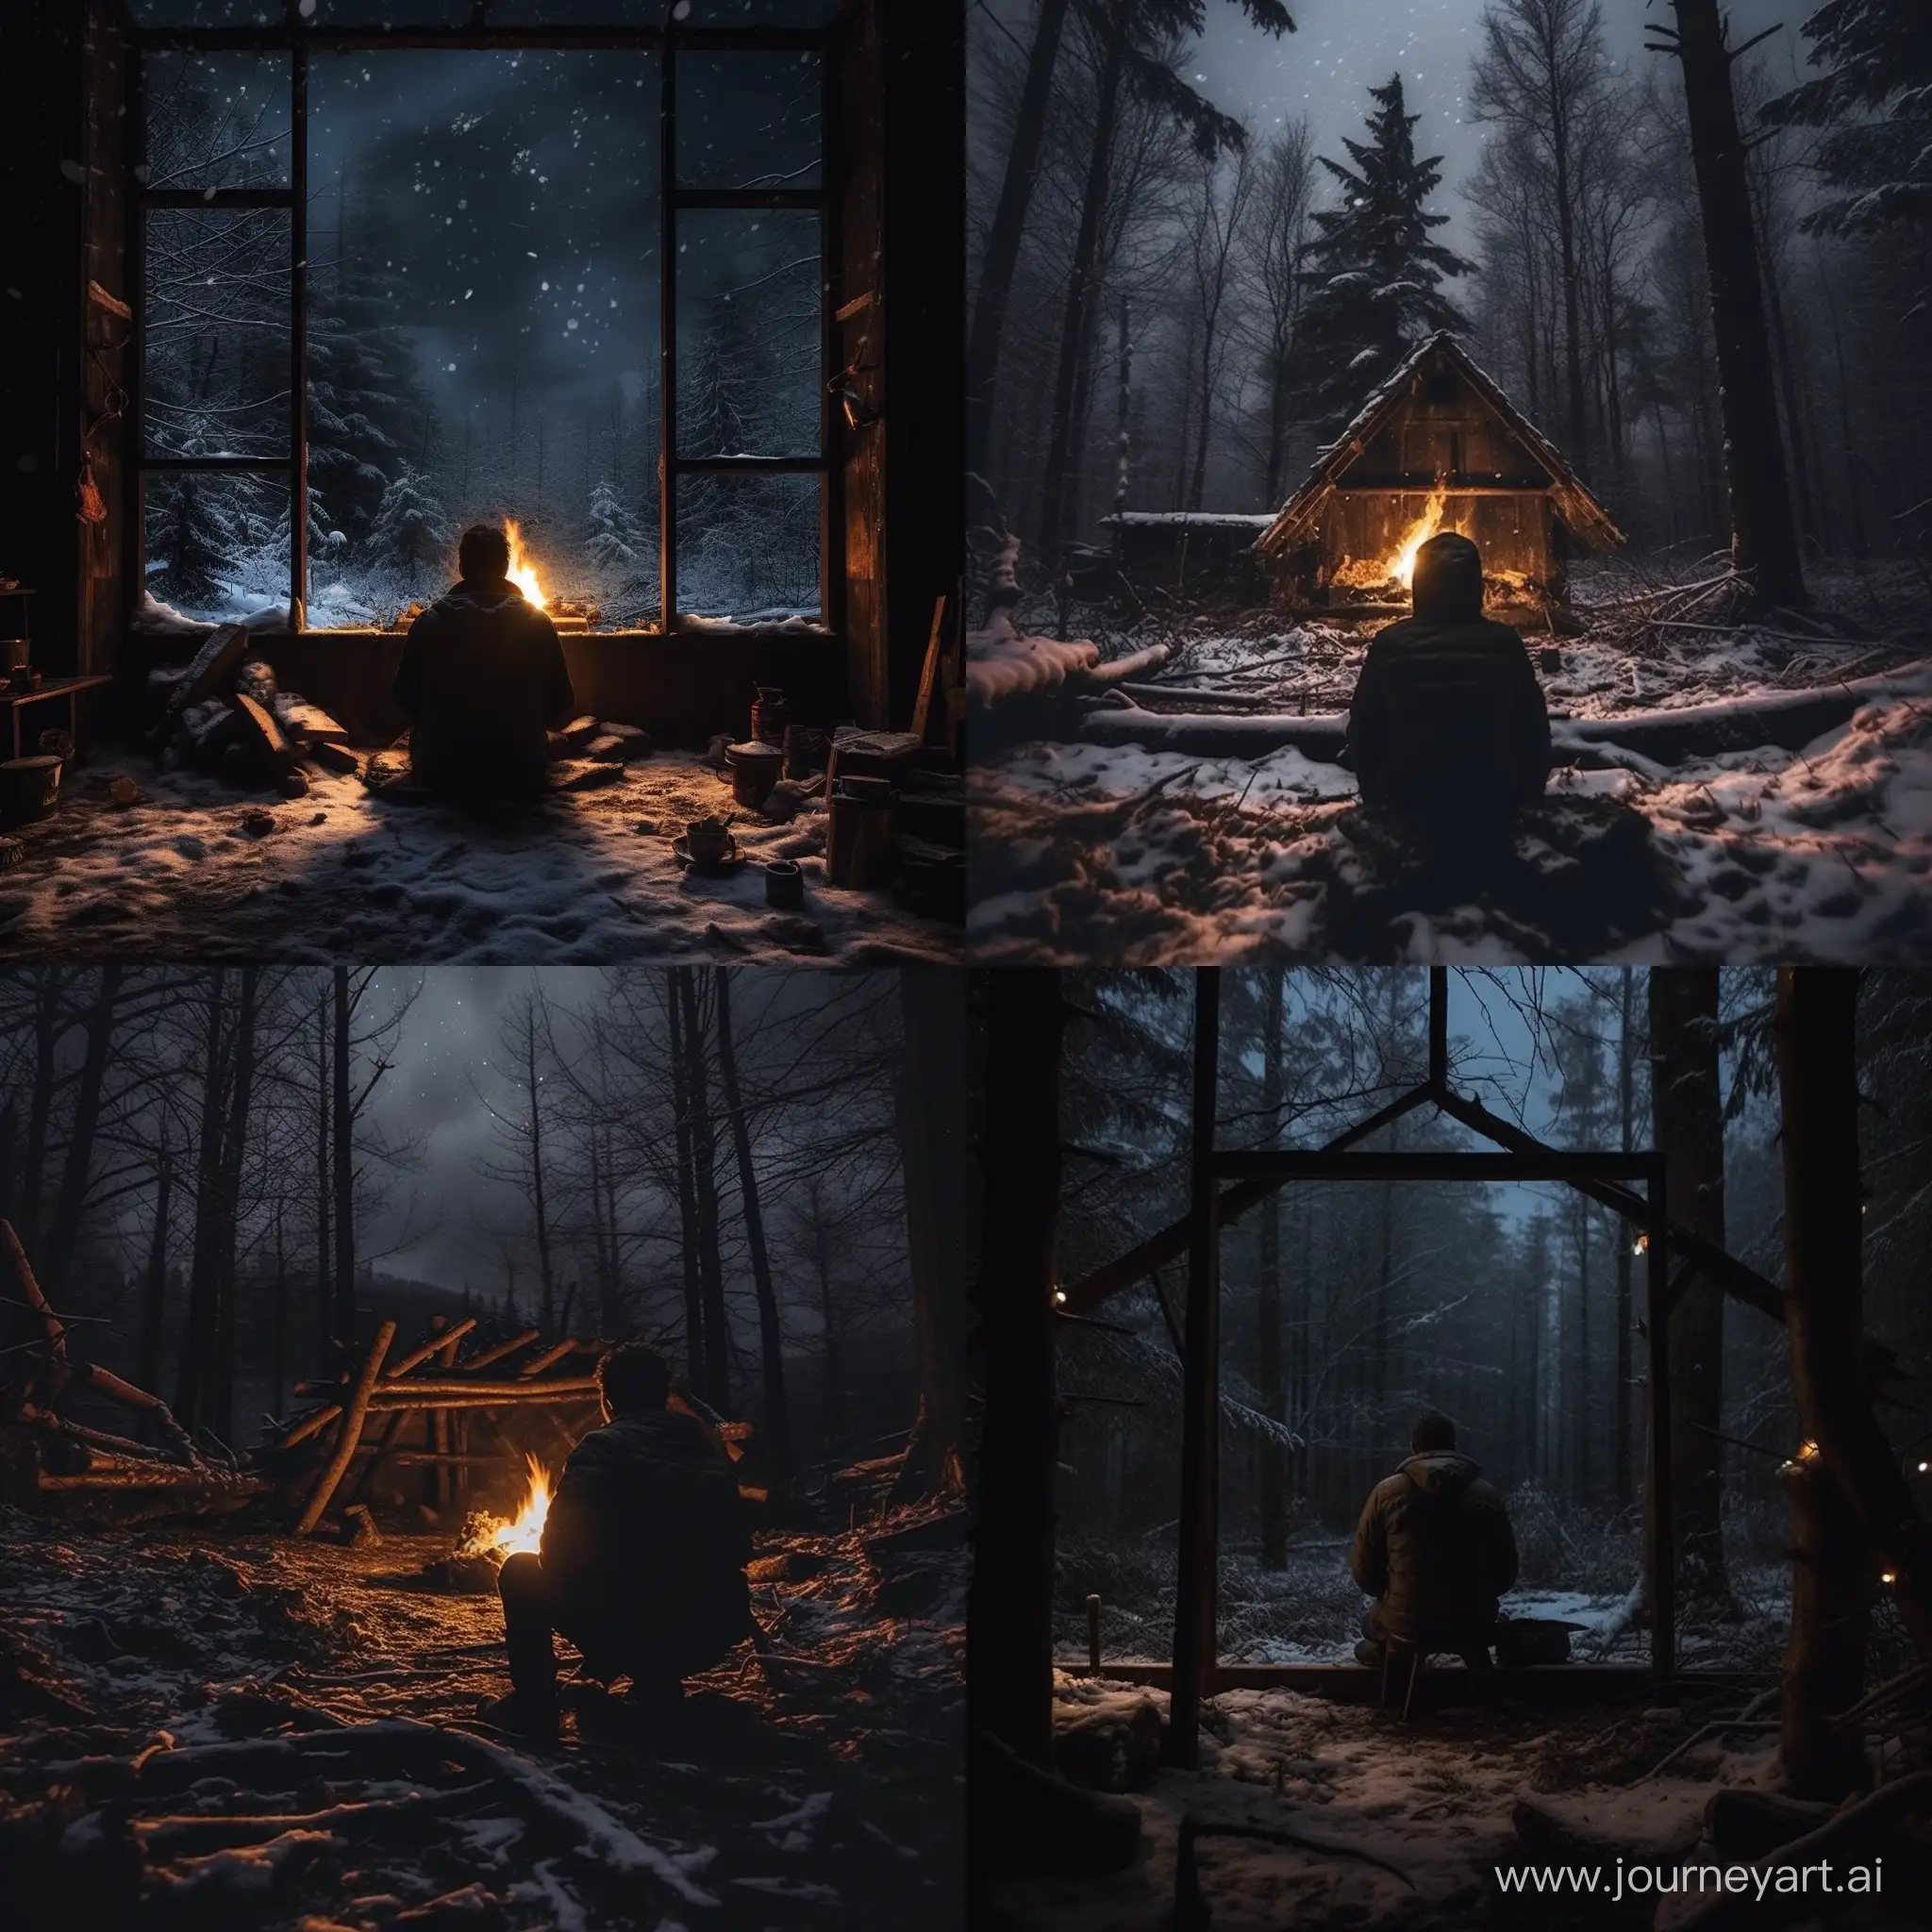 I am a lonely person and I am very sad and depressed due to being away from my father. I like to be alone in a forest hut on a snowy night by the fireplace and look outside for hours remembering the good memories I had with my father. A war between inside and outside. I'm happening